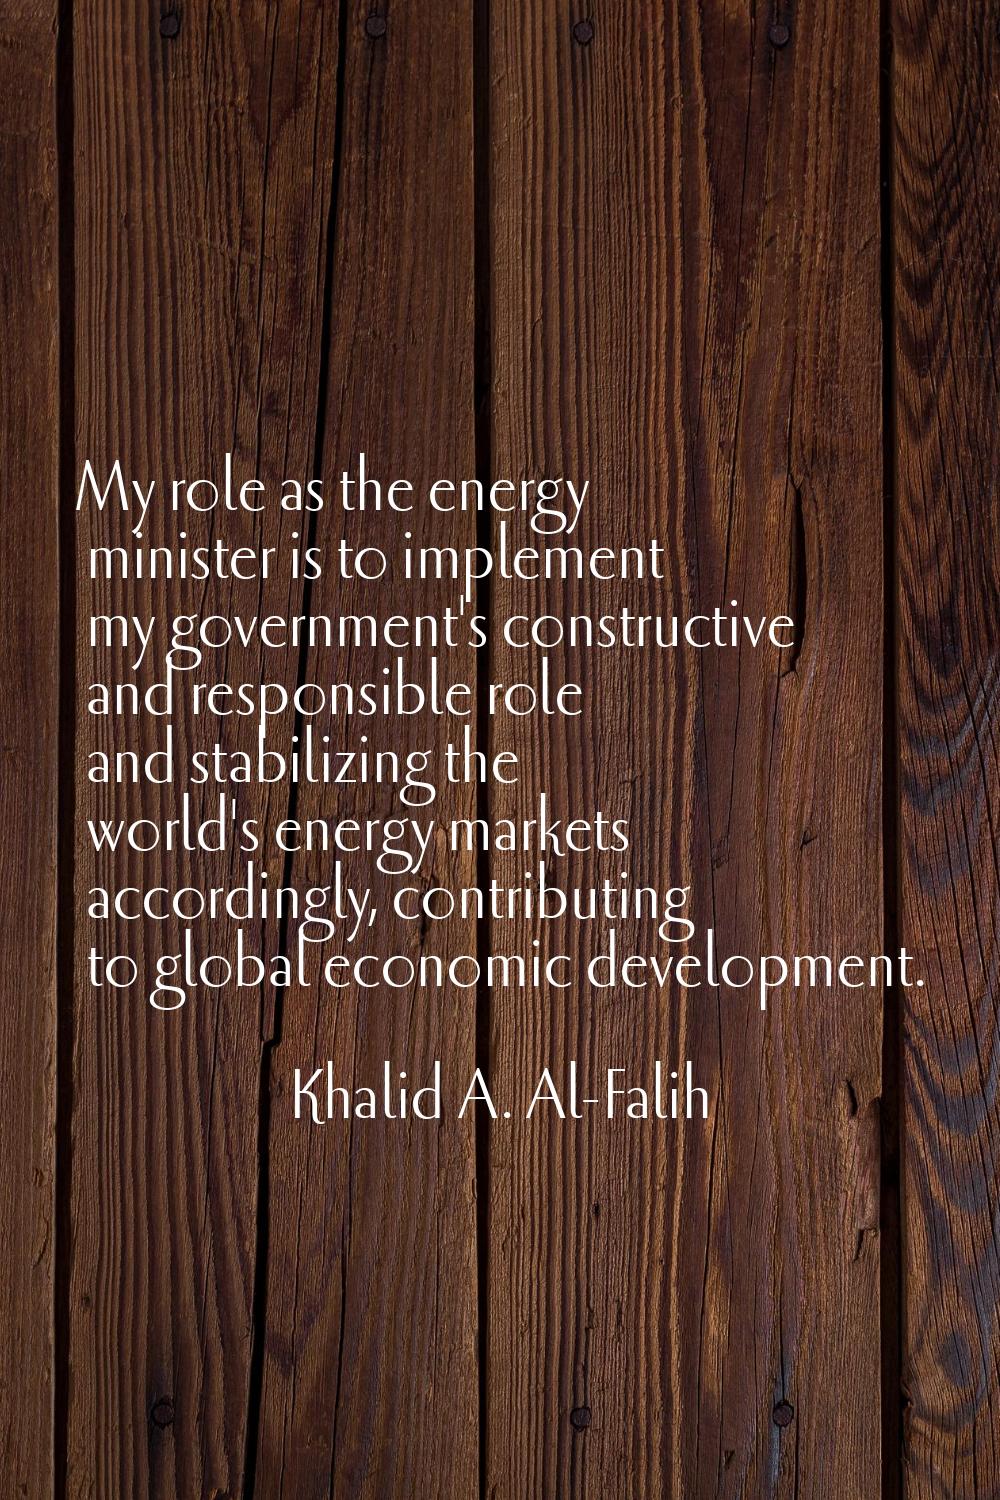 My role as the energy minister is to implement my government's constructive and responsible role an